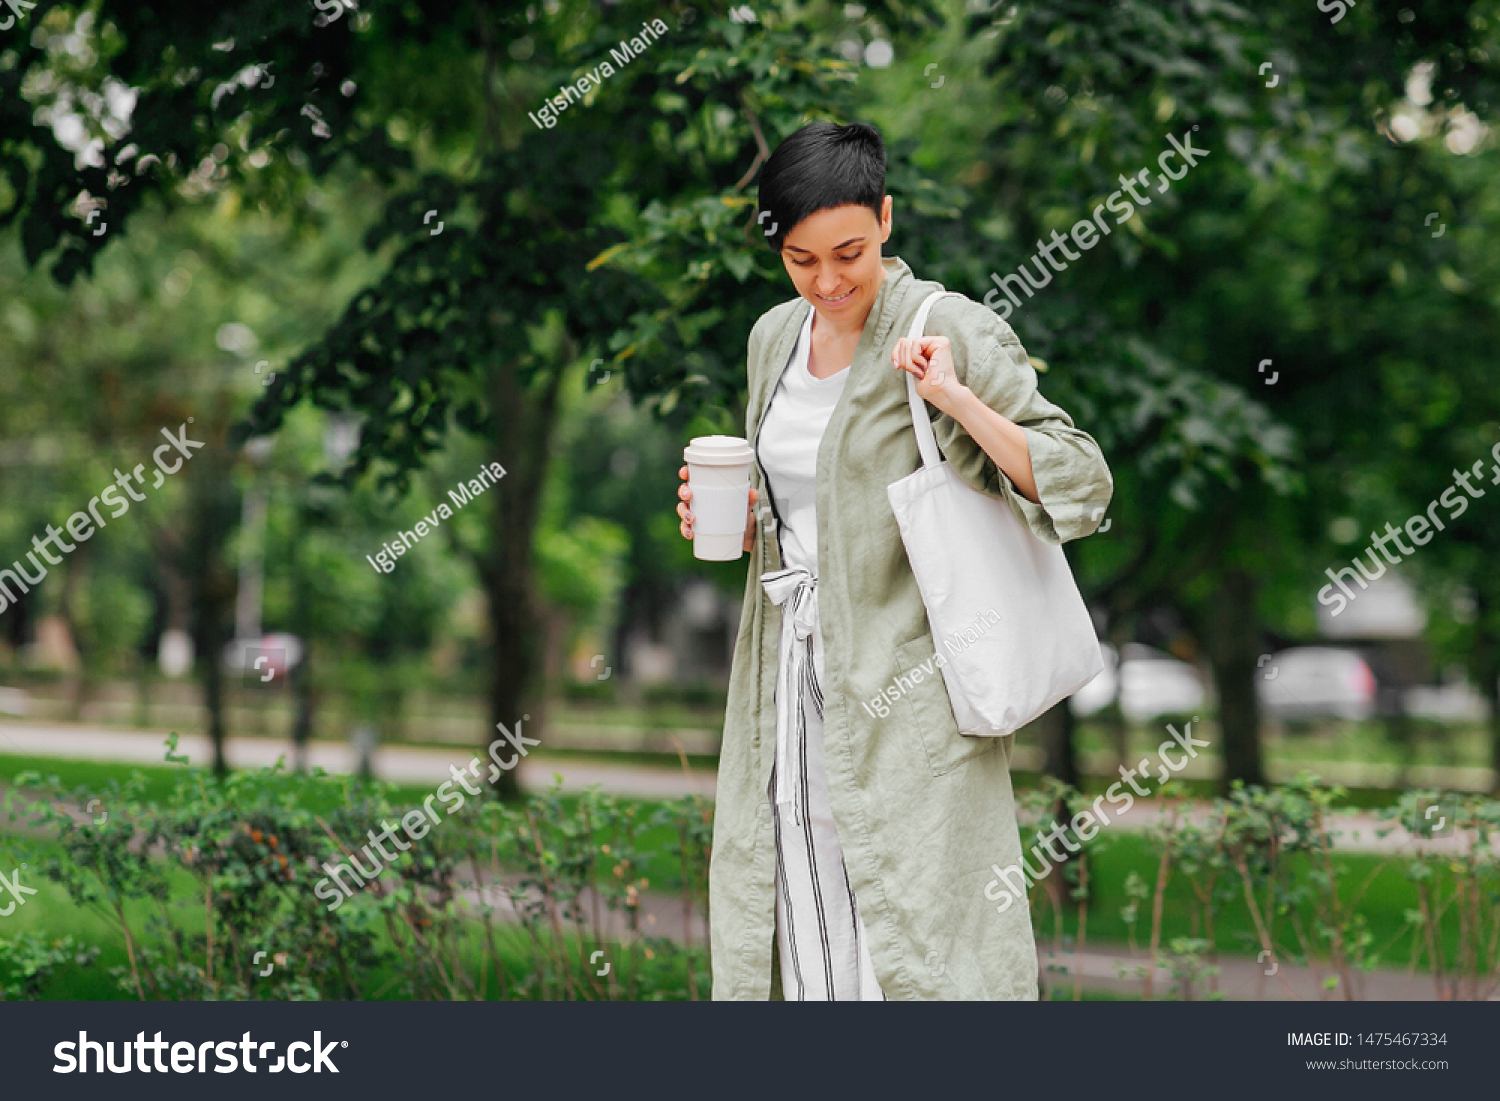 Woman with short hair holding reusable coffee cup and eco bag enjoying morning. Eco friendly concept. #1475467334